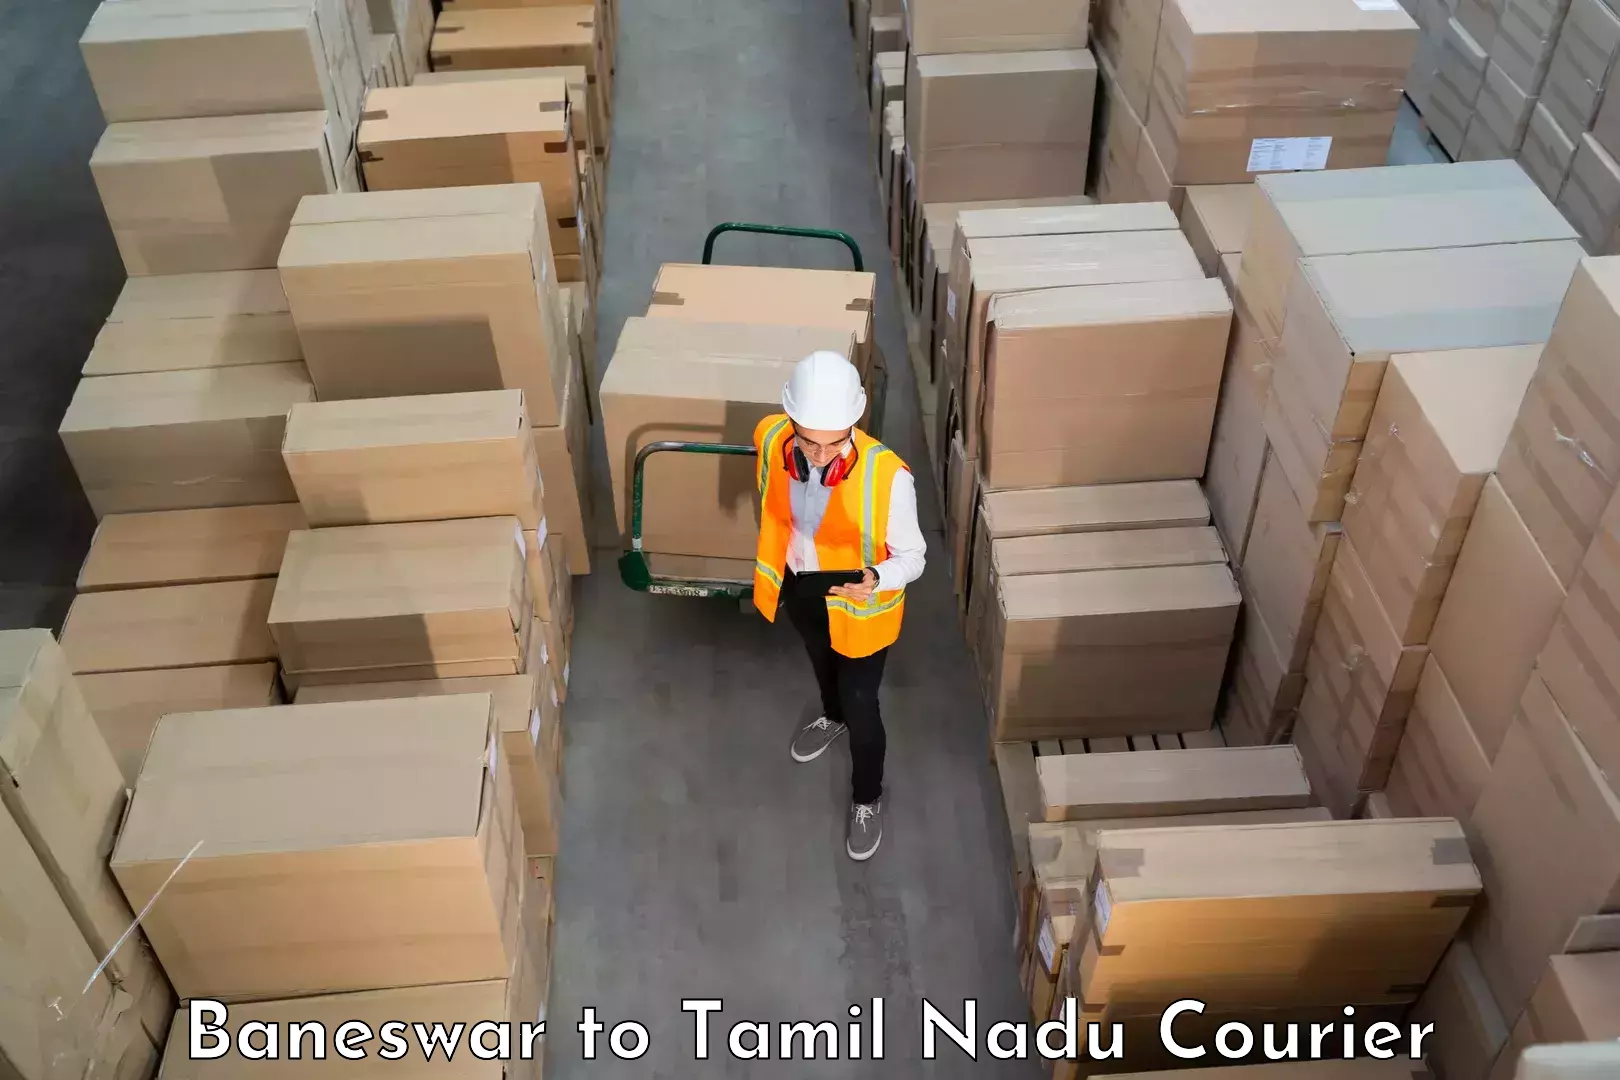 Professional movers and packers in Baneswar to Vellore Institute of Technology